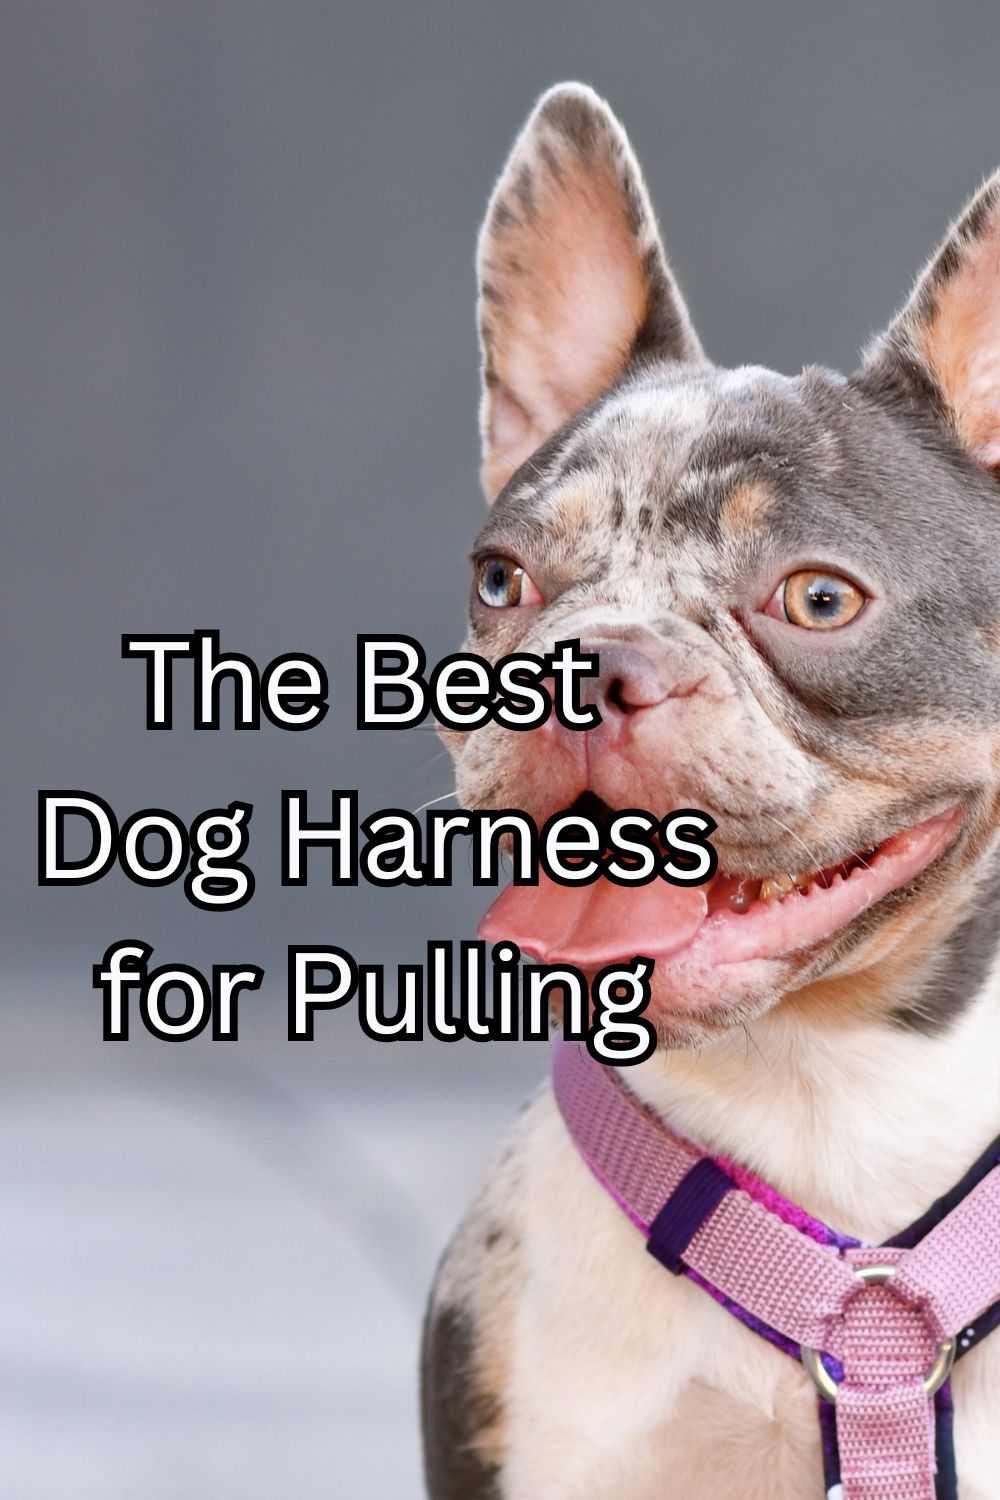 Best Dog Harness for Pulling